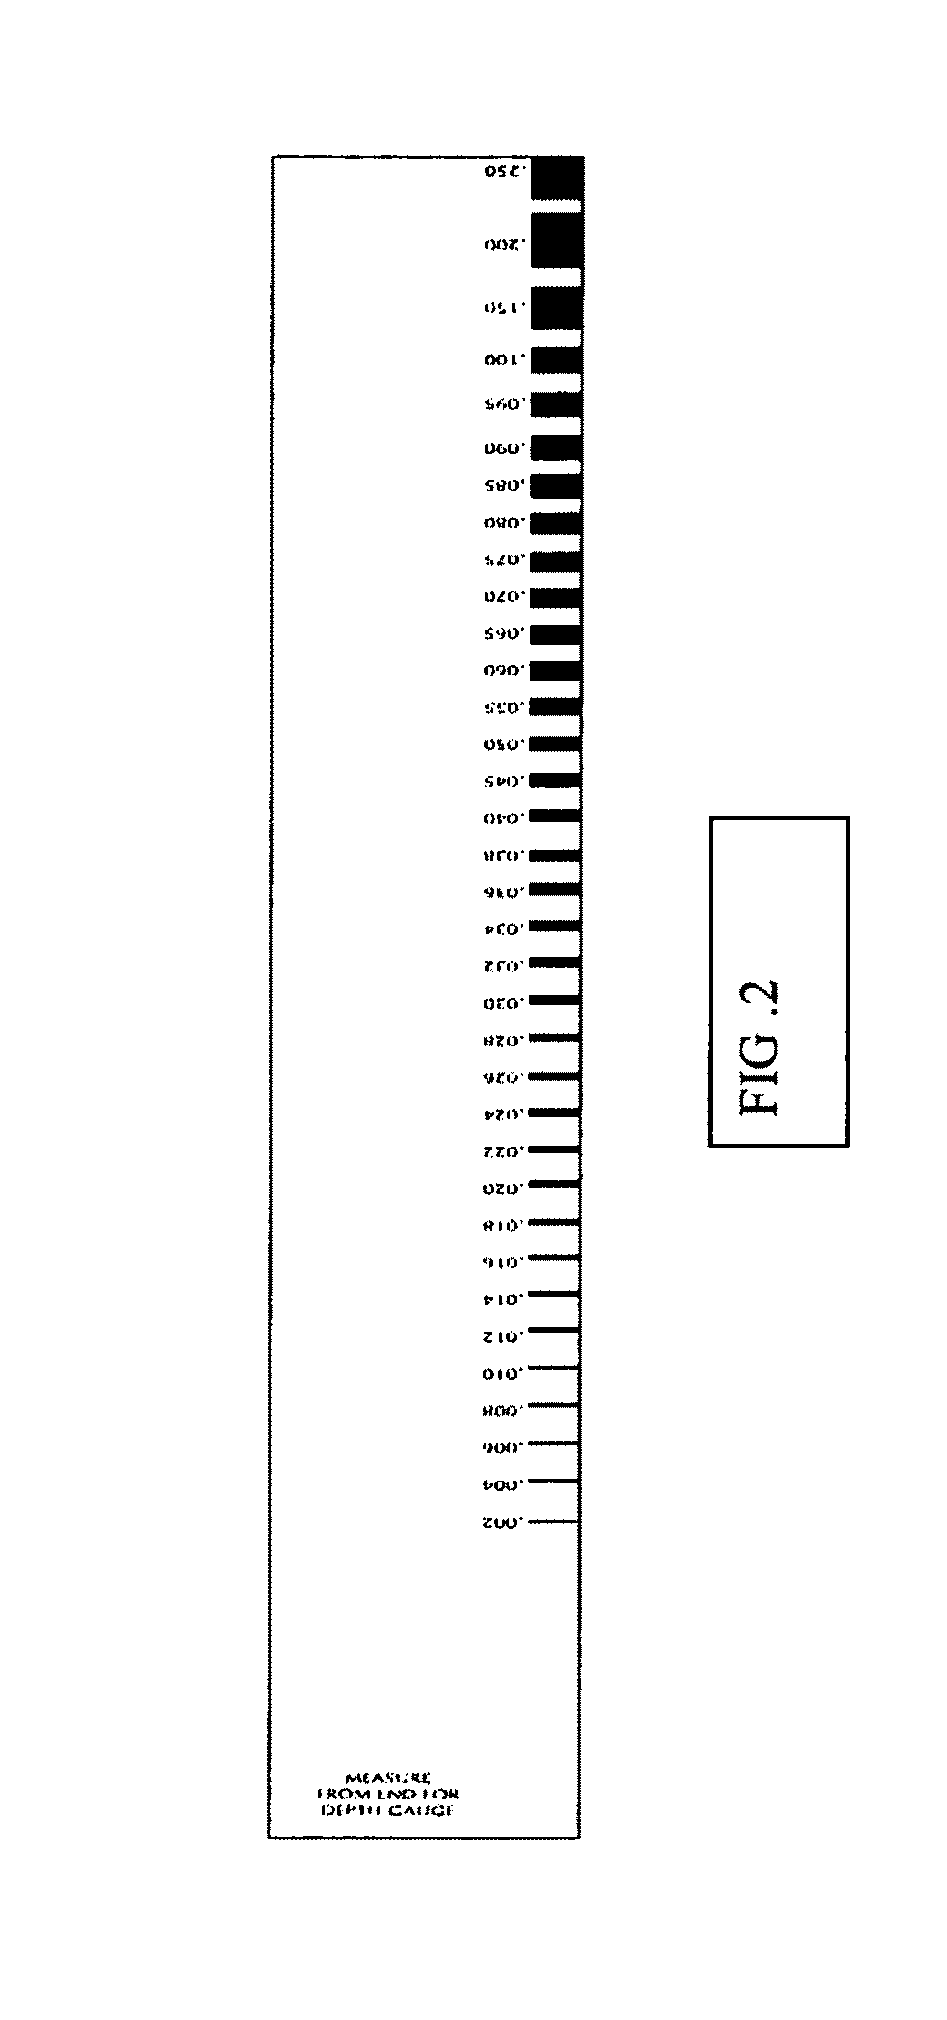 Method and Apparatus for Relating Measurements with Comparable Objects for the Purpose of Recording Evidence